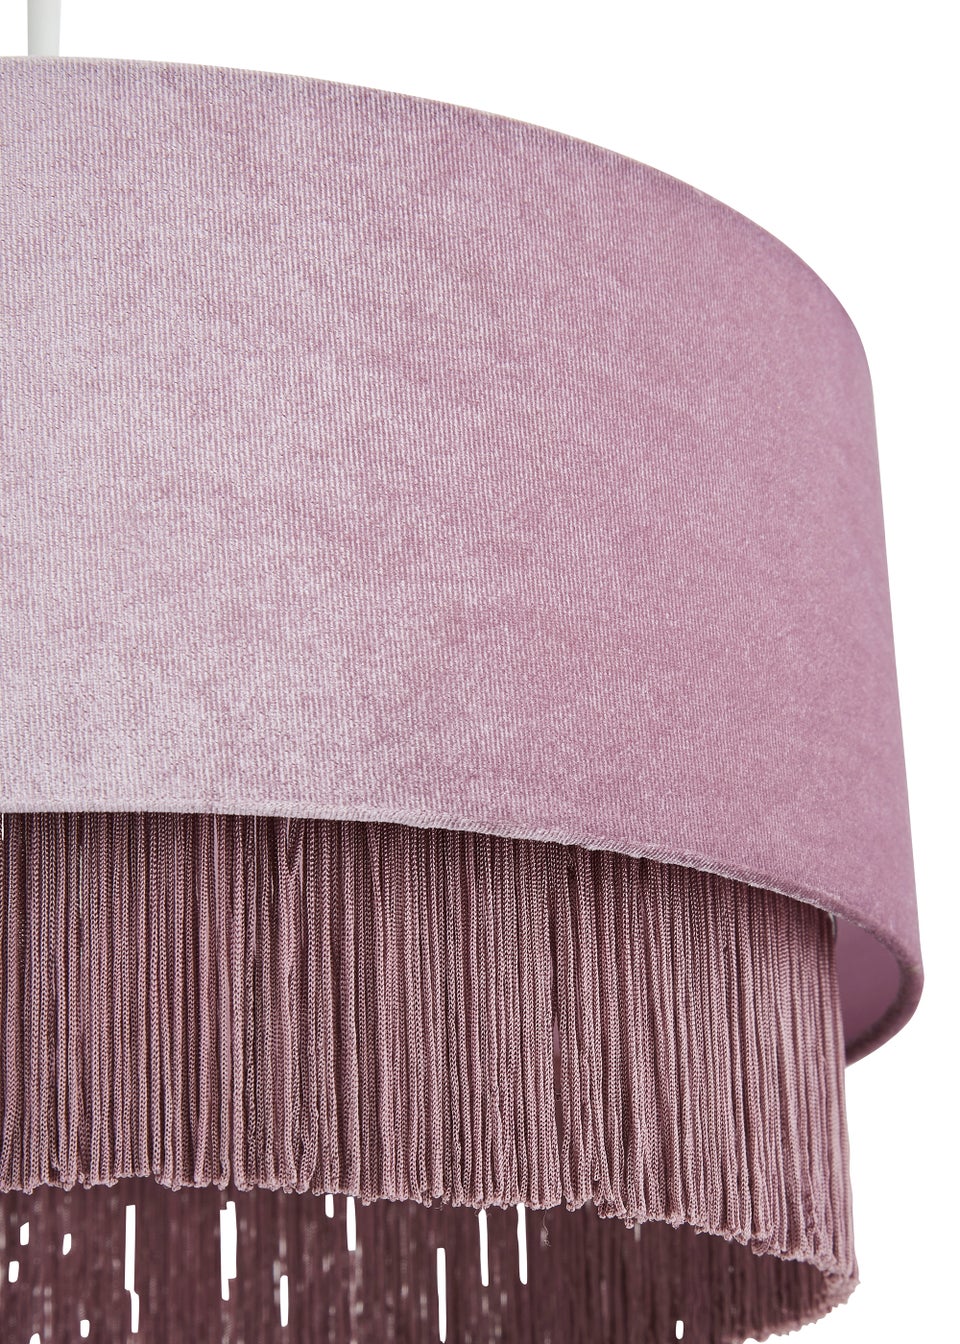 Inlight Fringed Easy Fit Lamp Shade (19cm x 38cm)